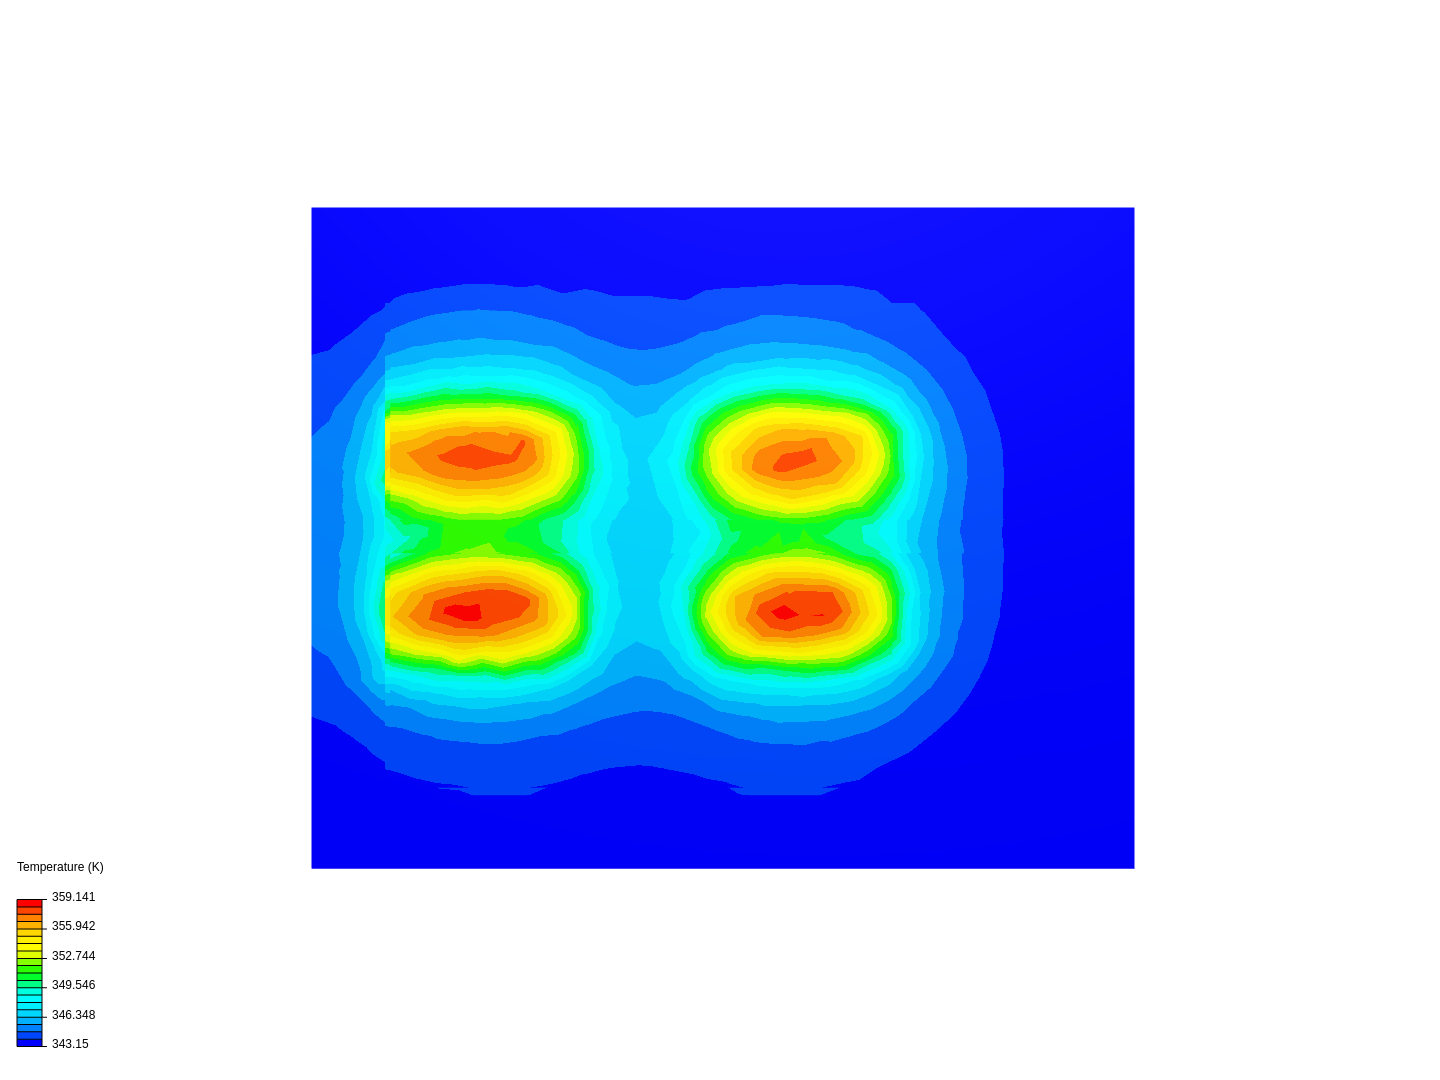 Thermal model for DBC image